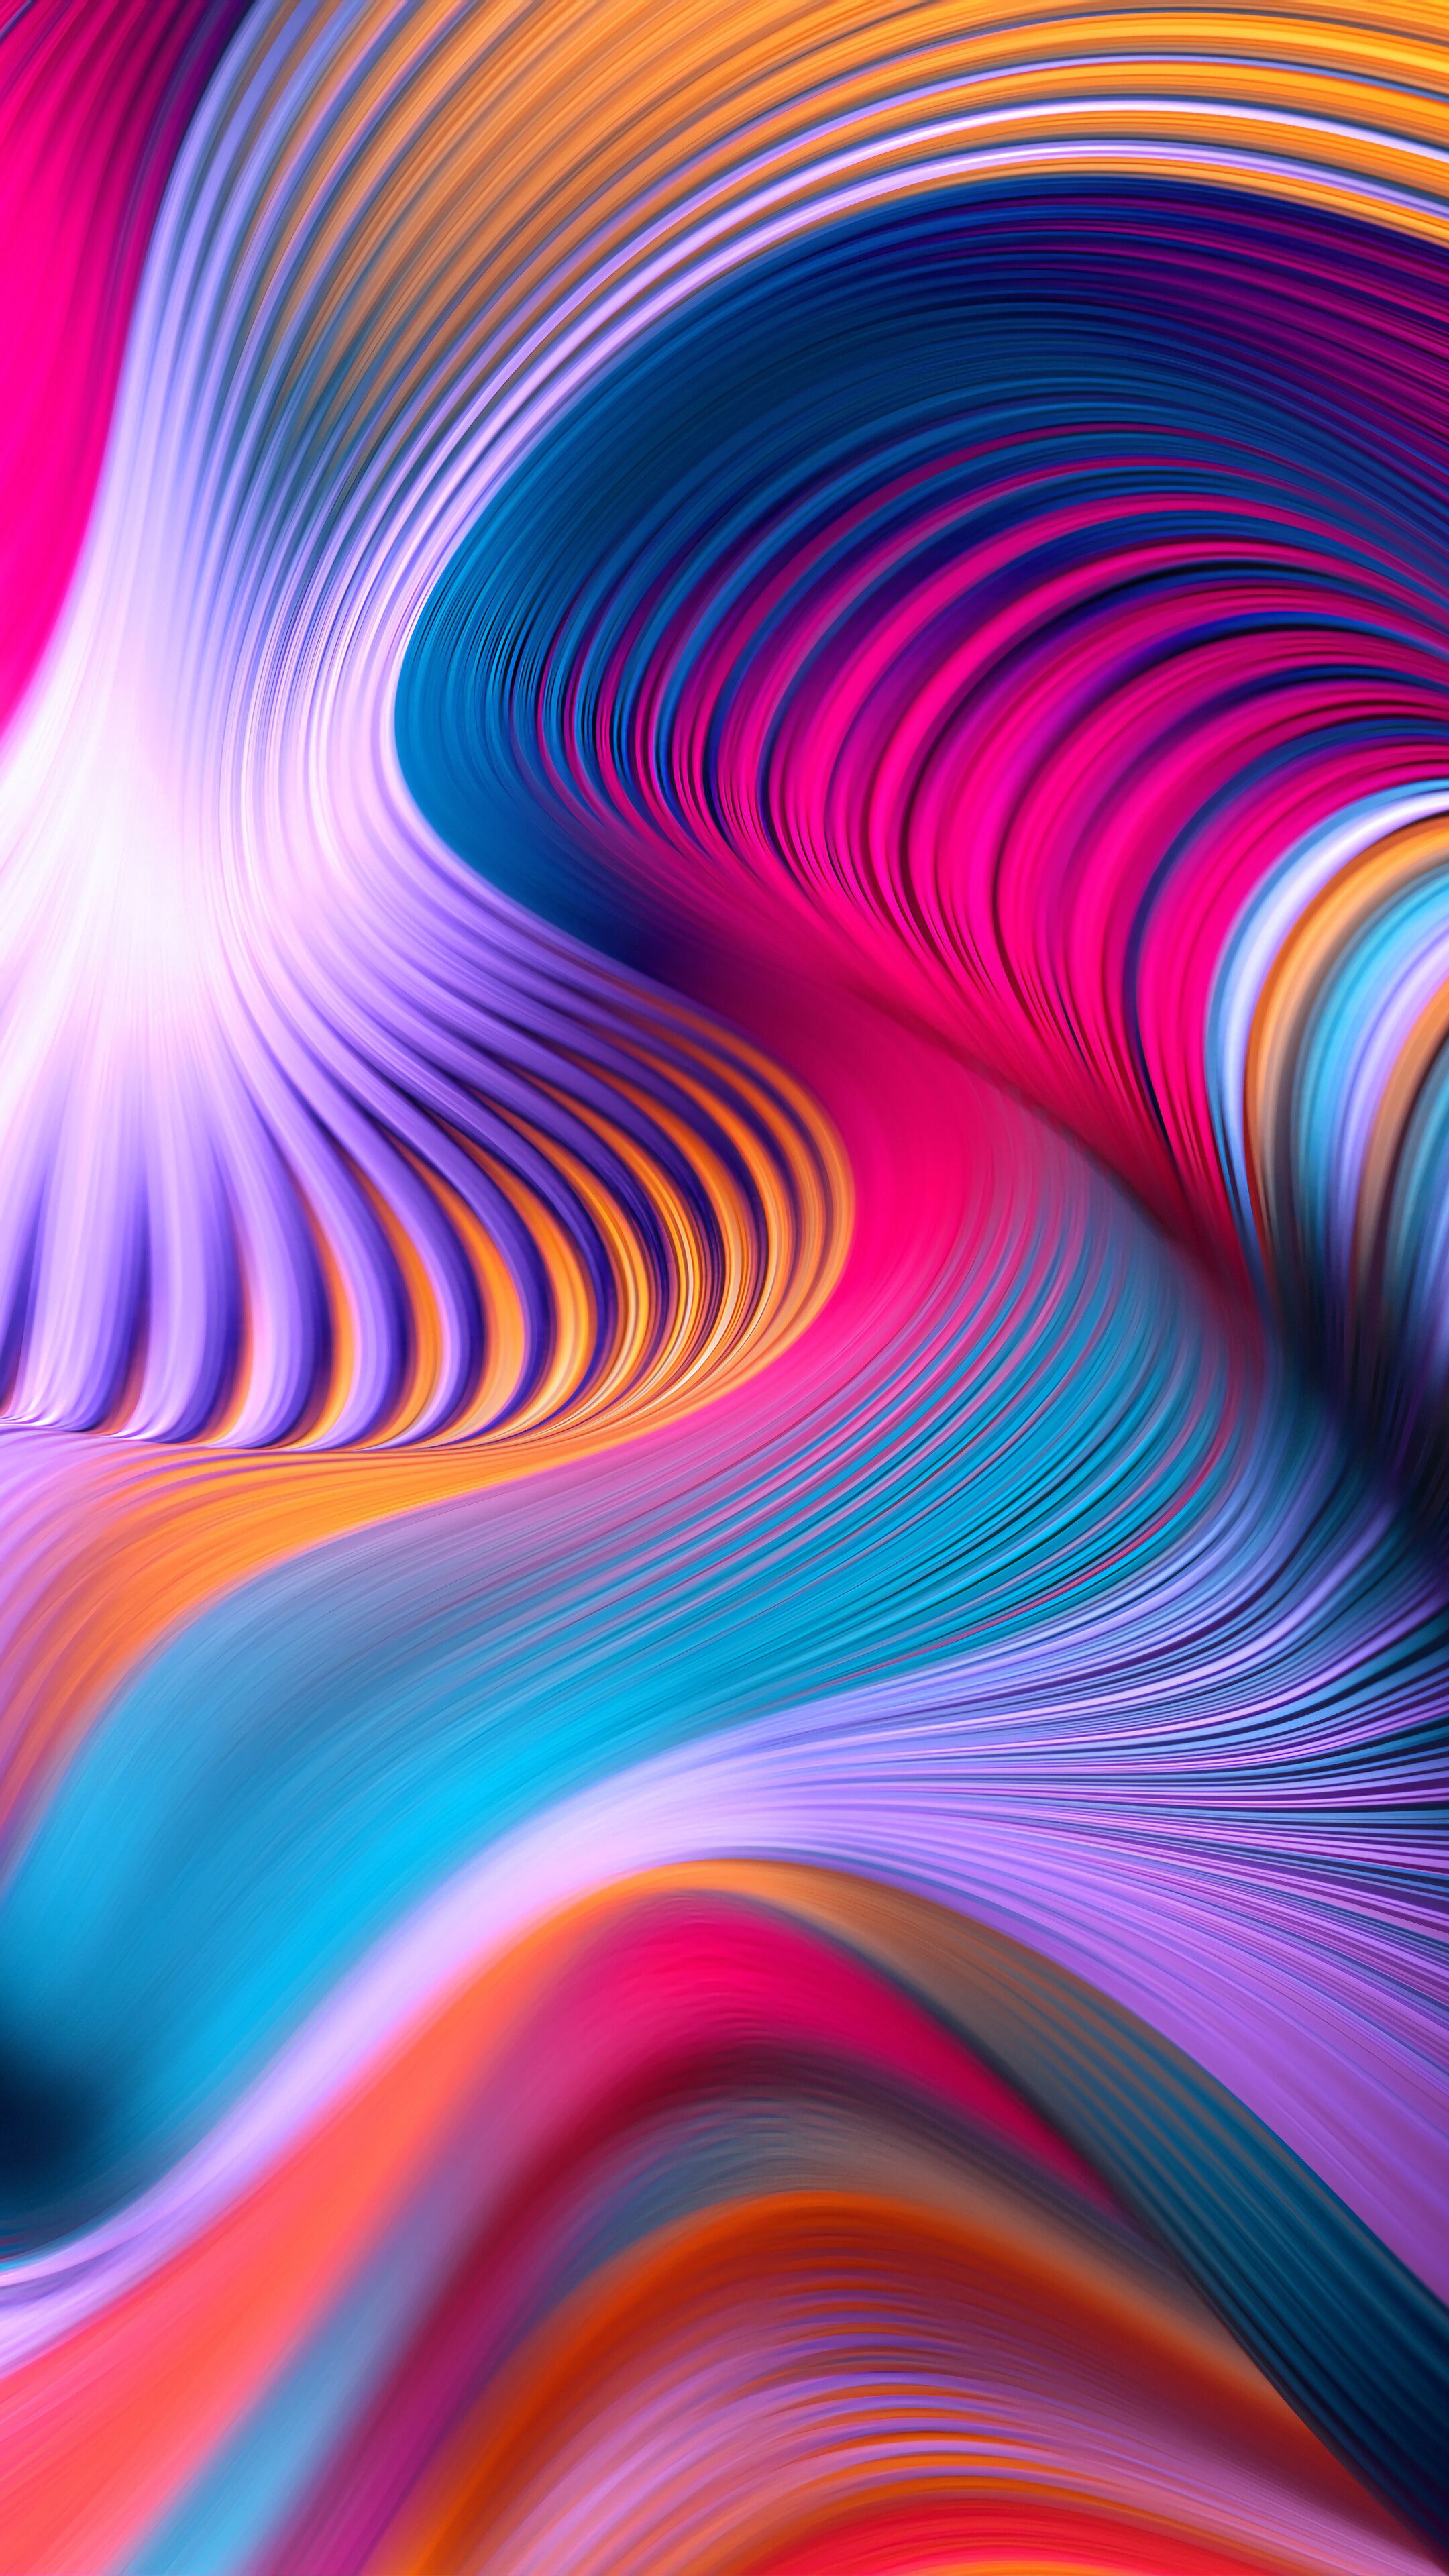 Abstract, Colorful, Digital Art, 4K phone HD Wallpaper, Image, Background, Photo and Picture. Mocah.org HD Wallpaper